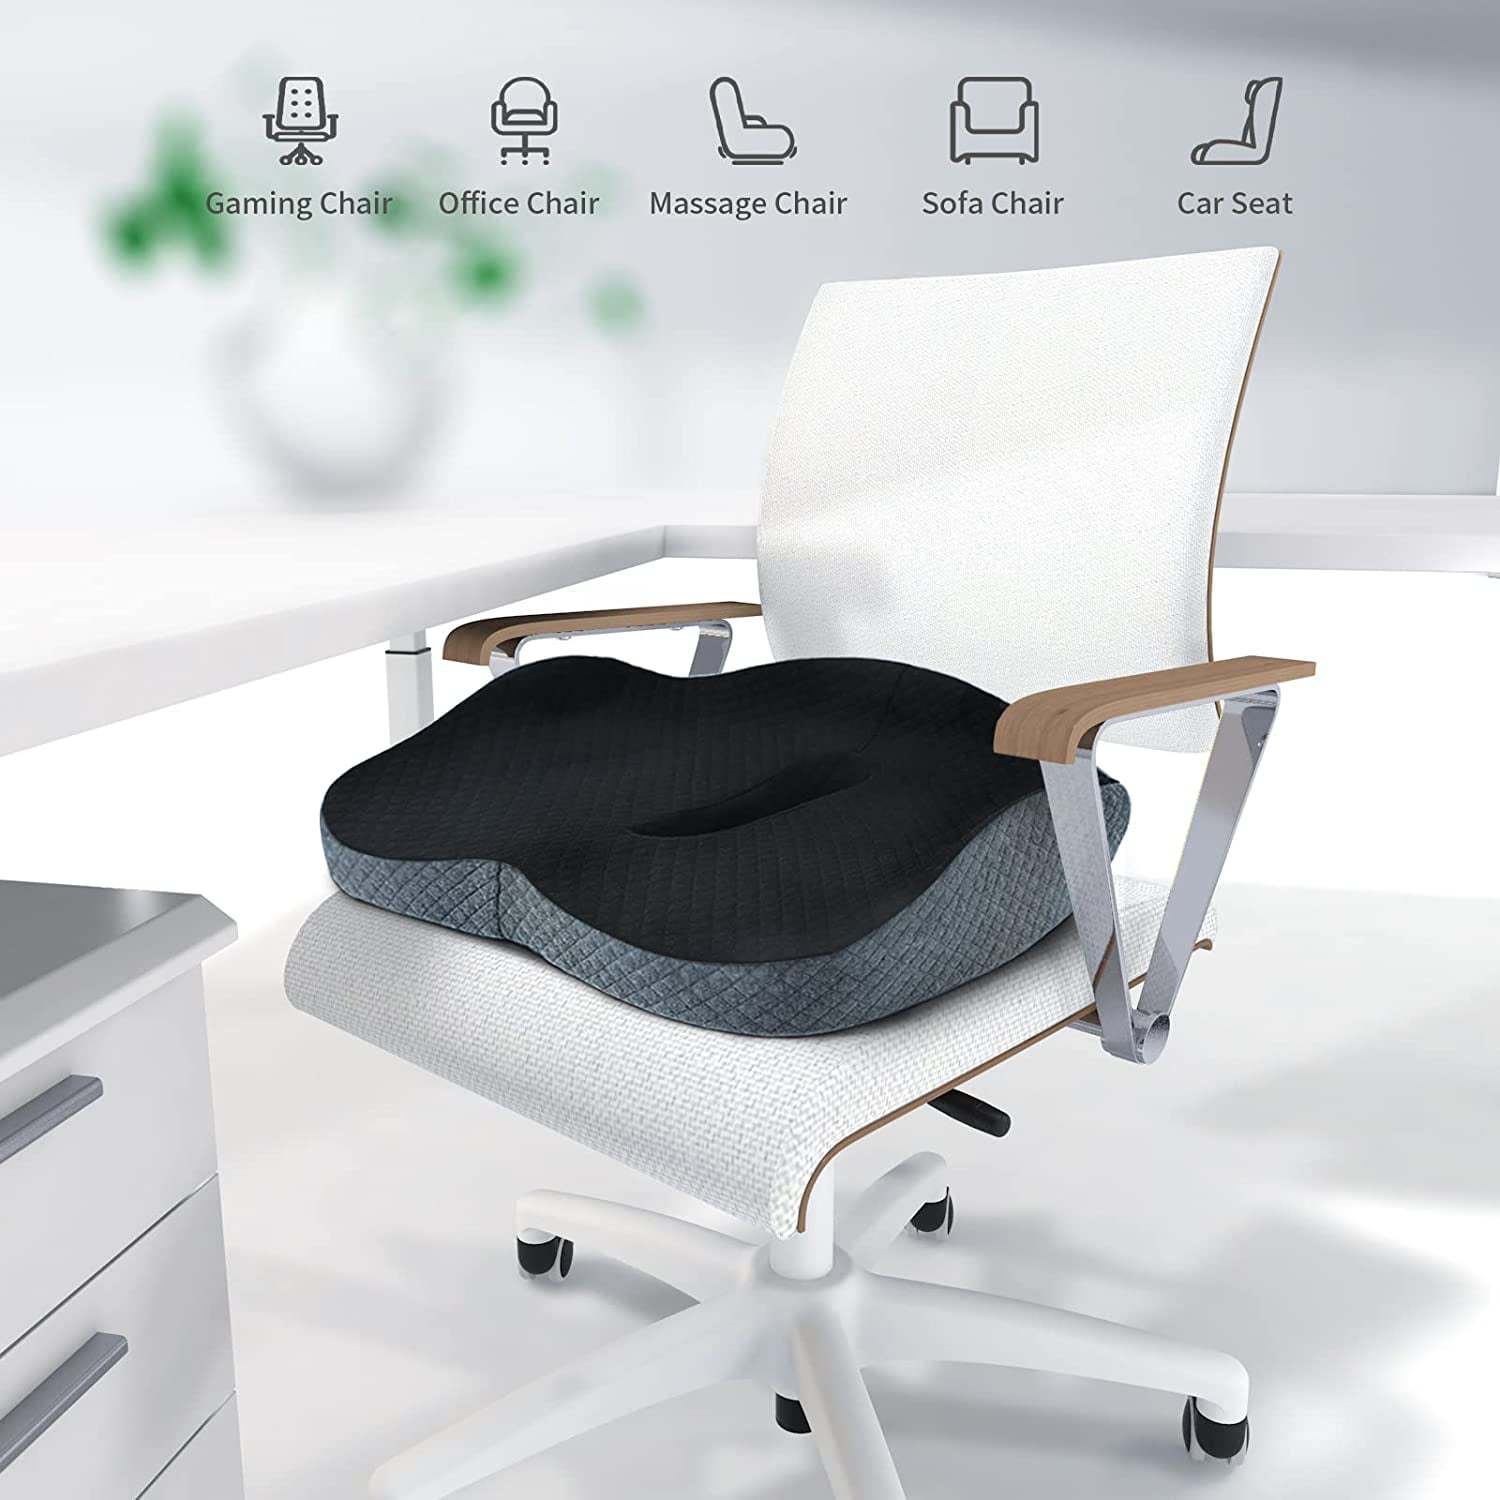 OVEYNERSIN Seat Cushion for Office Chair - Comfortable Desk Chair